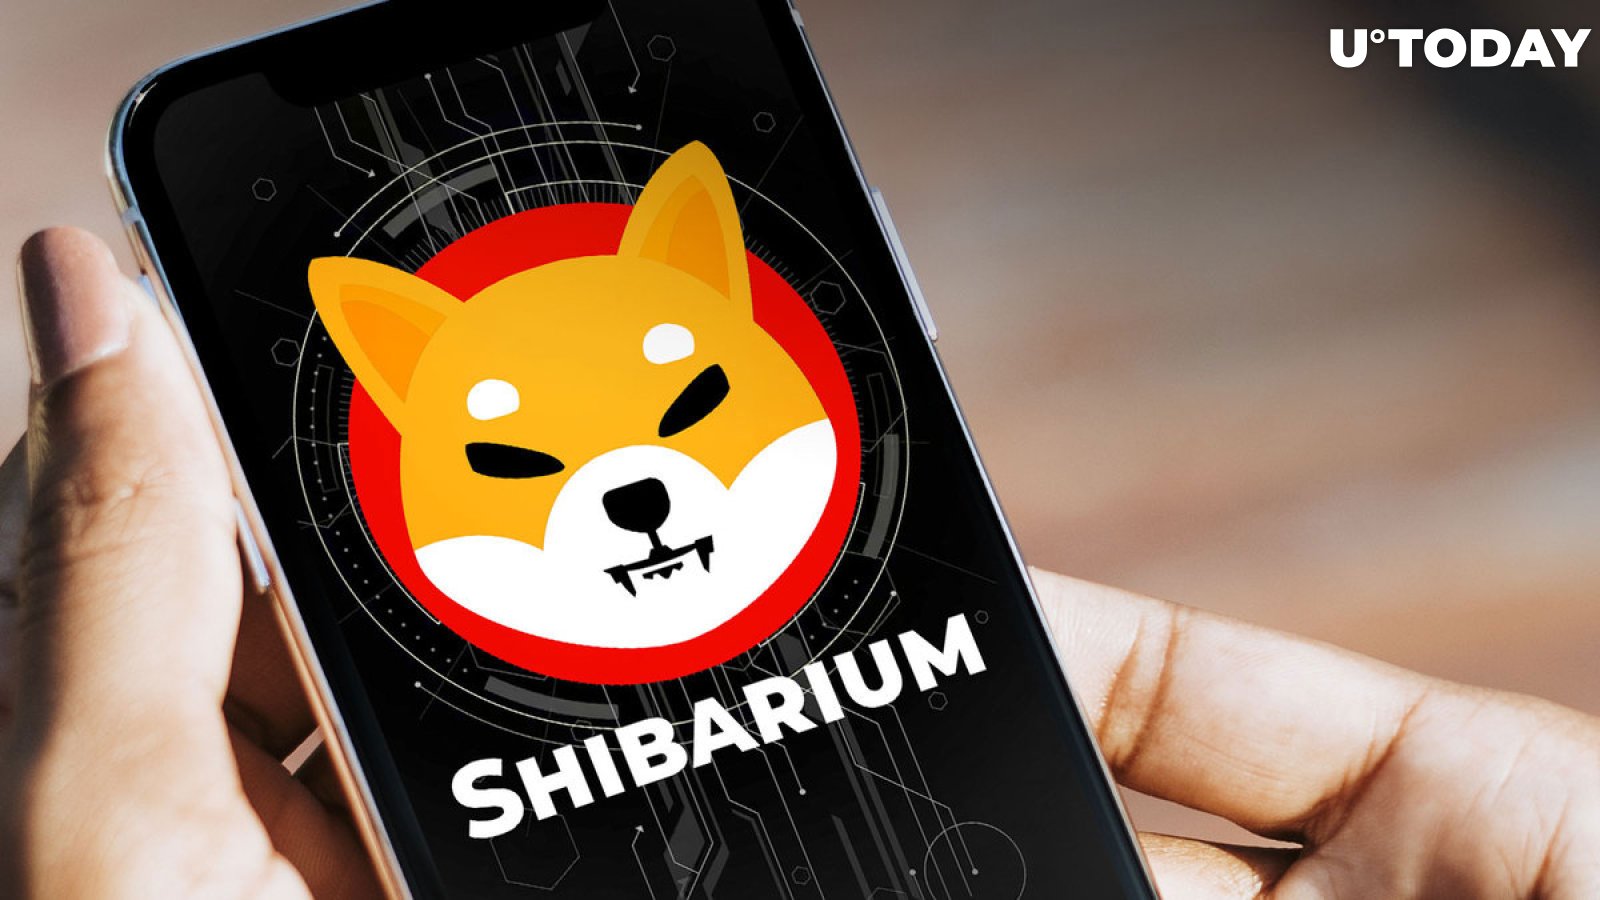 Shibarium Reaches All-Time High in Daily Transactions: Details